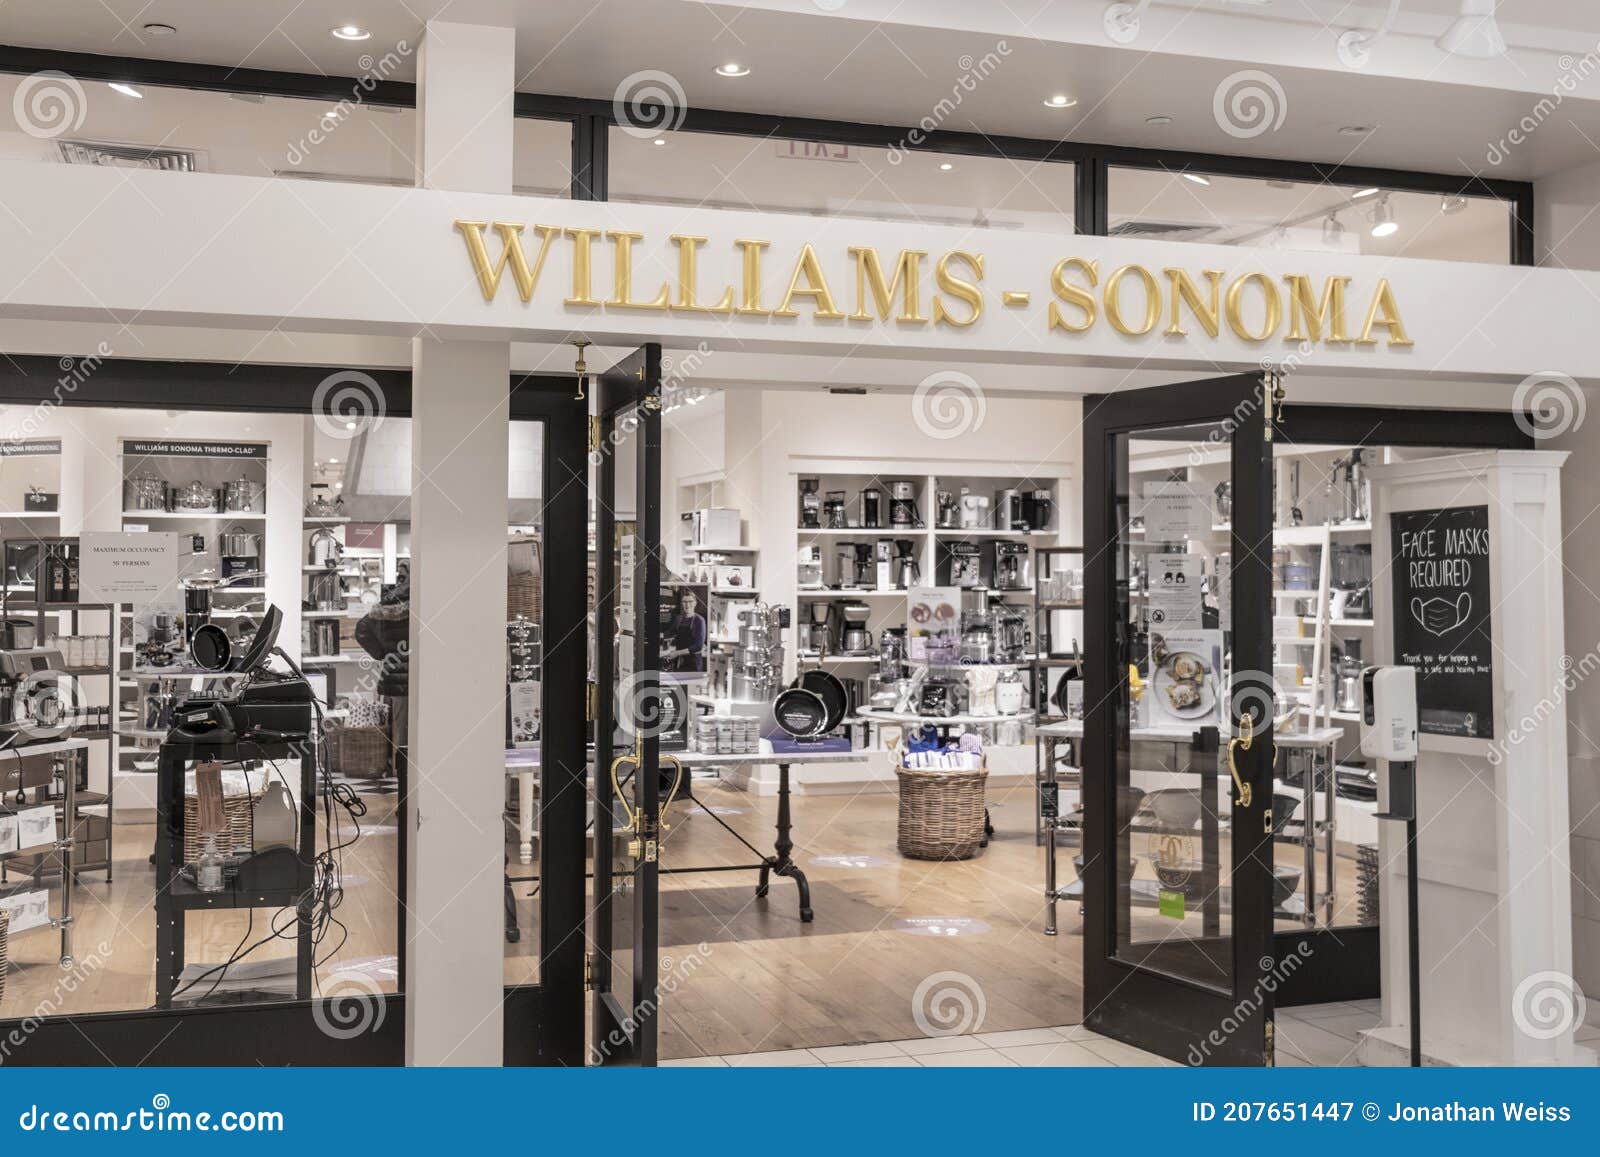 Williams-Sonoma Home Furnishings at the Mall at Millenia in Orlando, FL